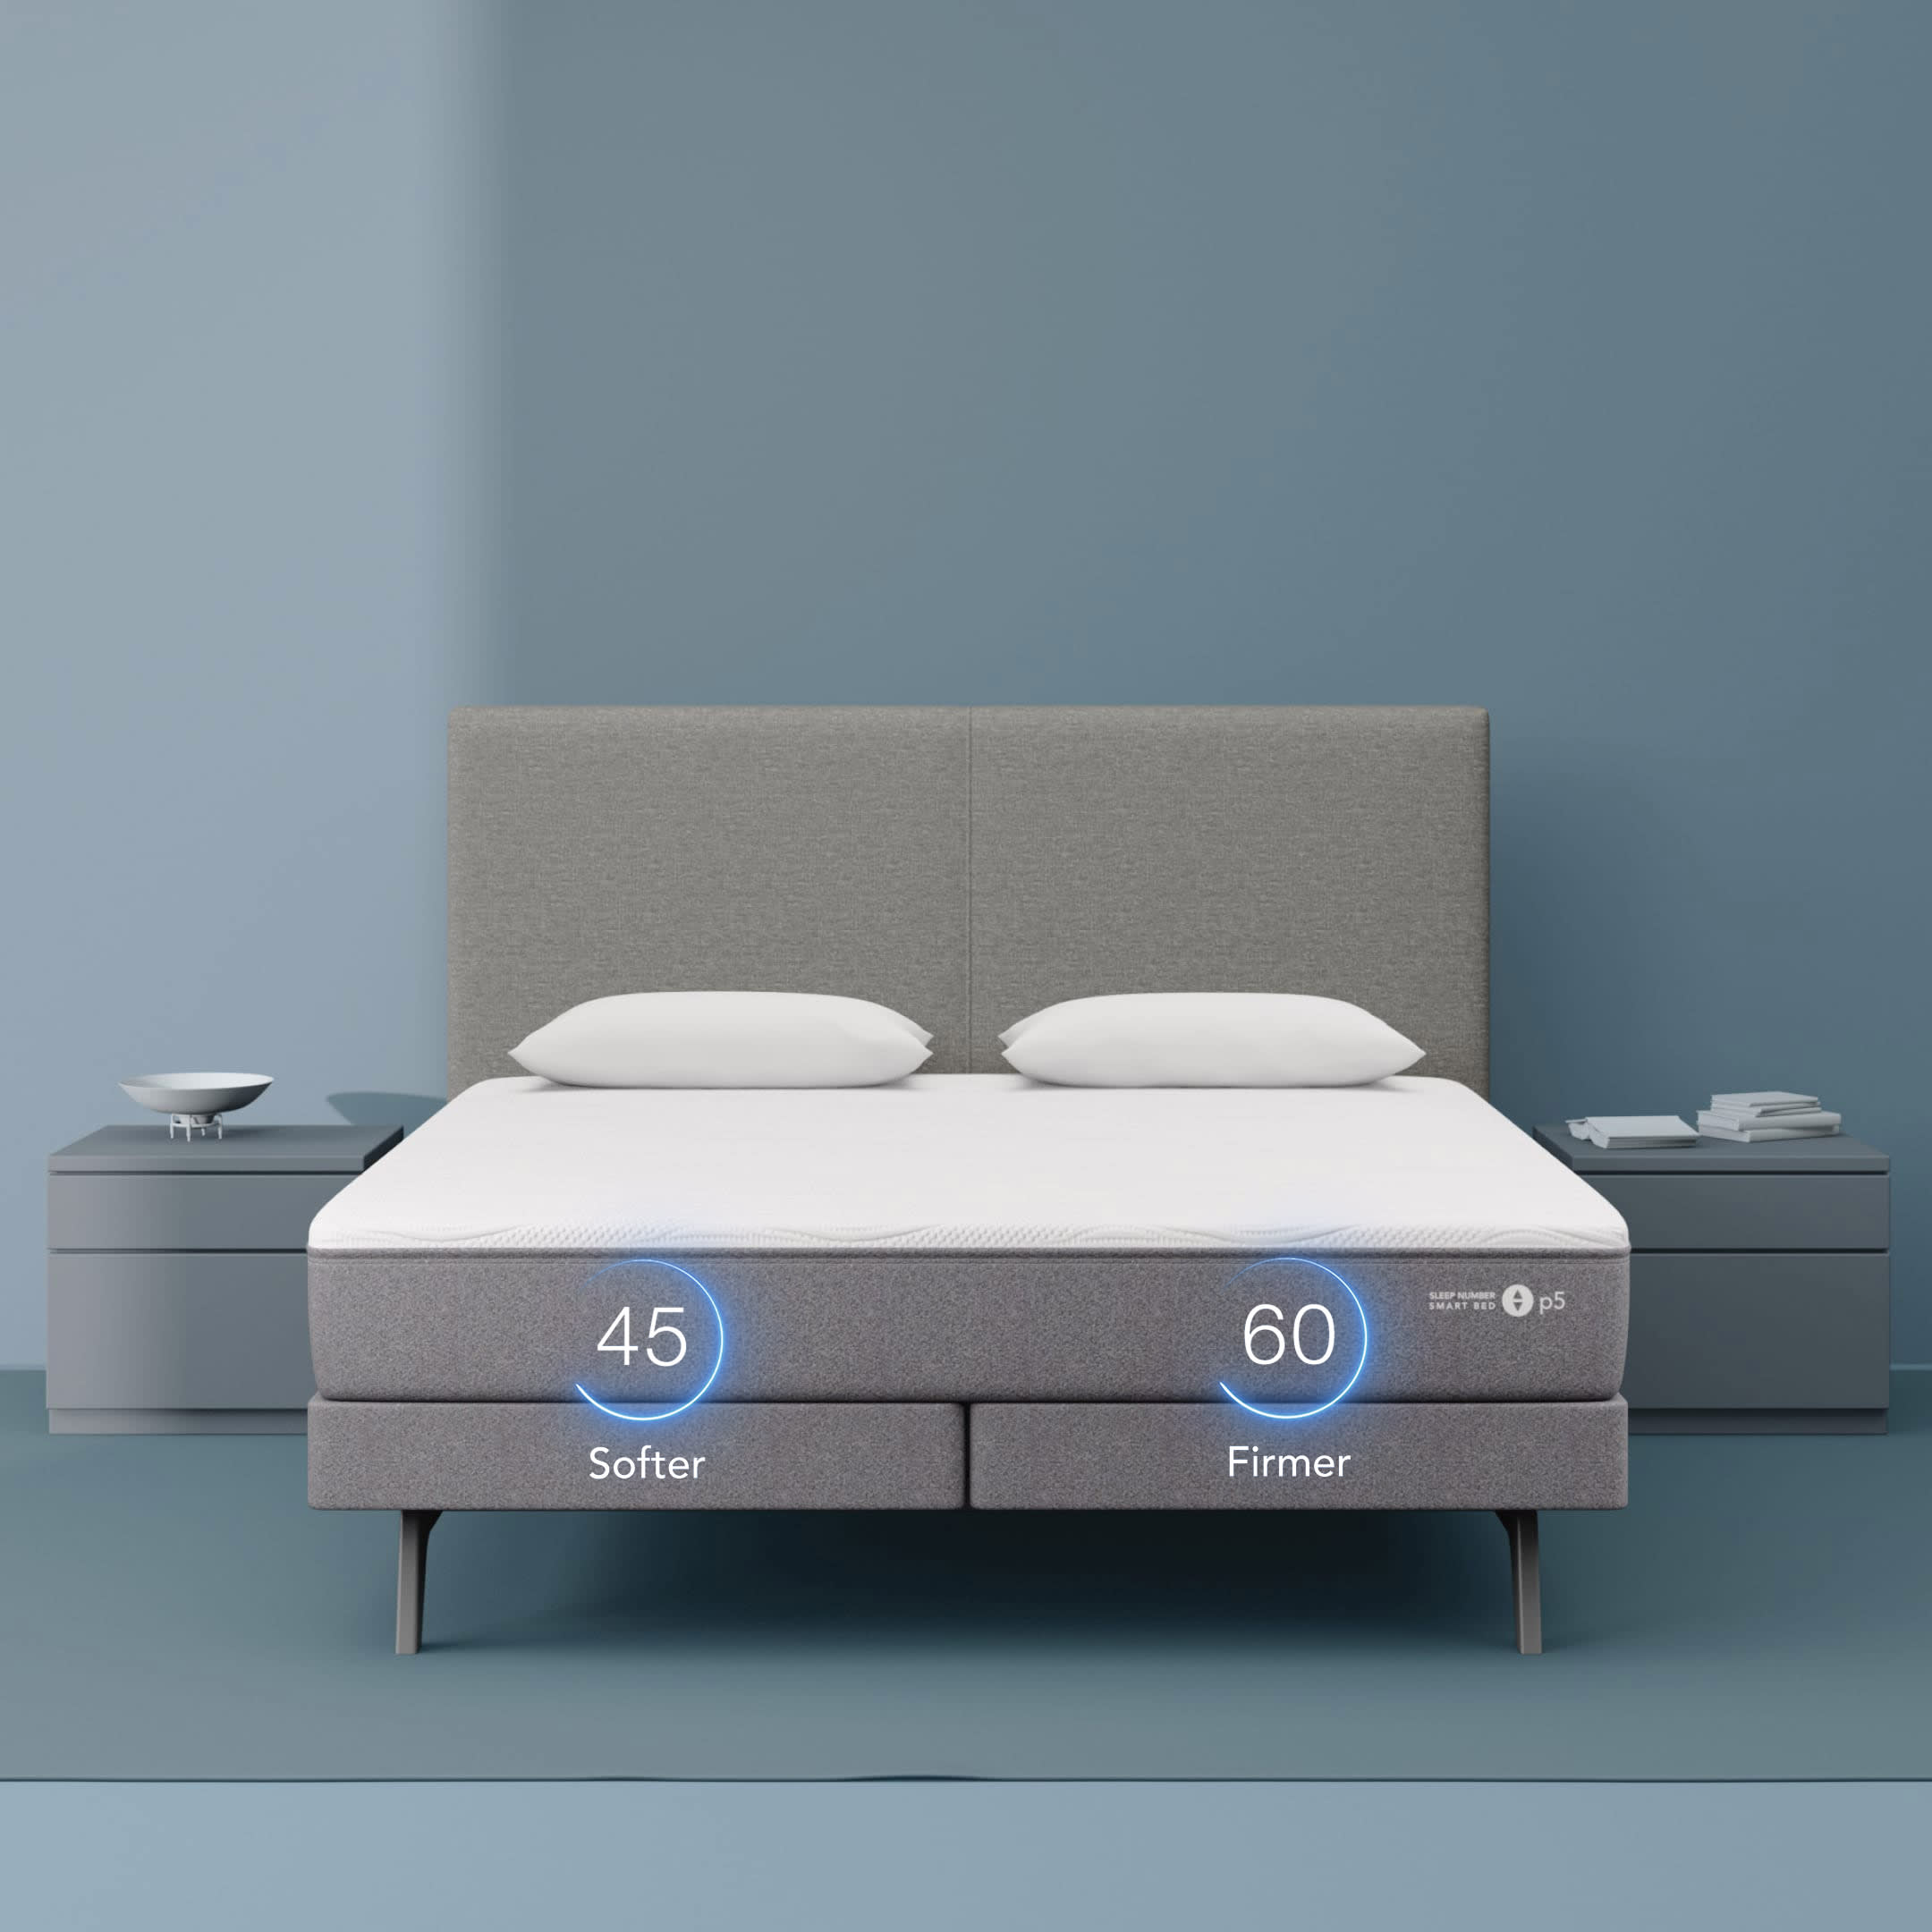 https://cdn.sleepnumber.com/image/upload/f_auto,q_auto:eco/v1695049046/workarea/catalog/product_images/p5/p5_PDP_Gallery_Front_Numbers